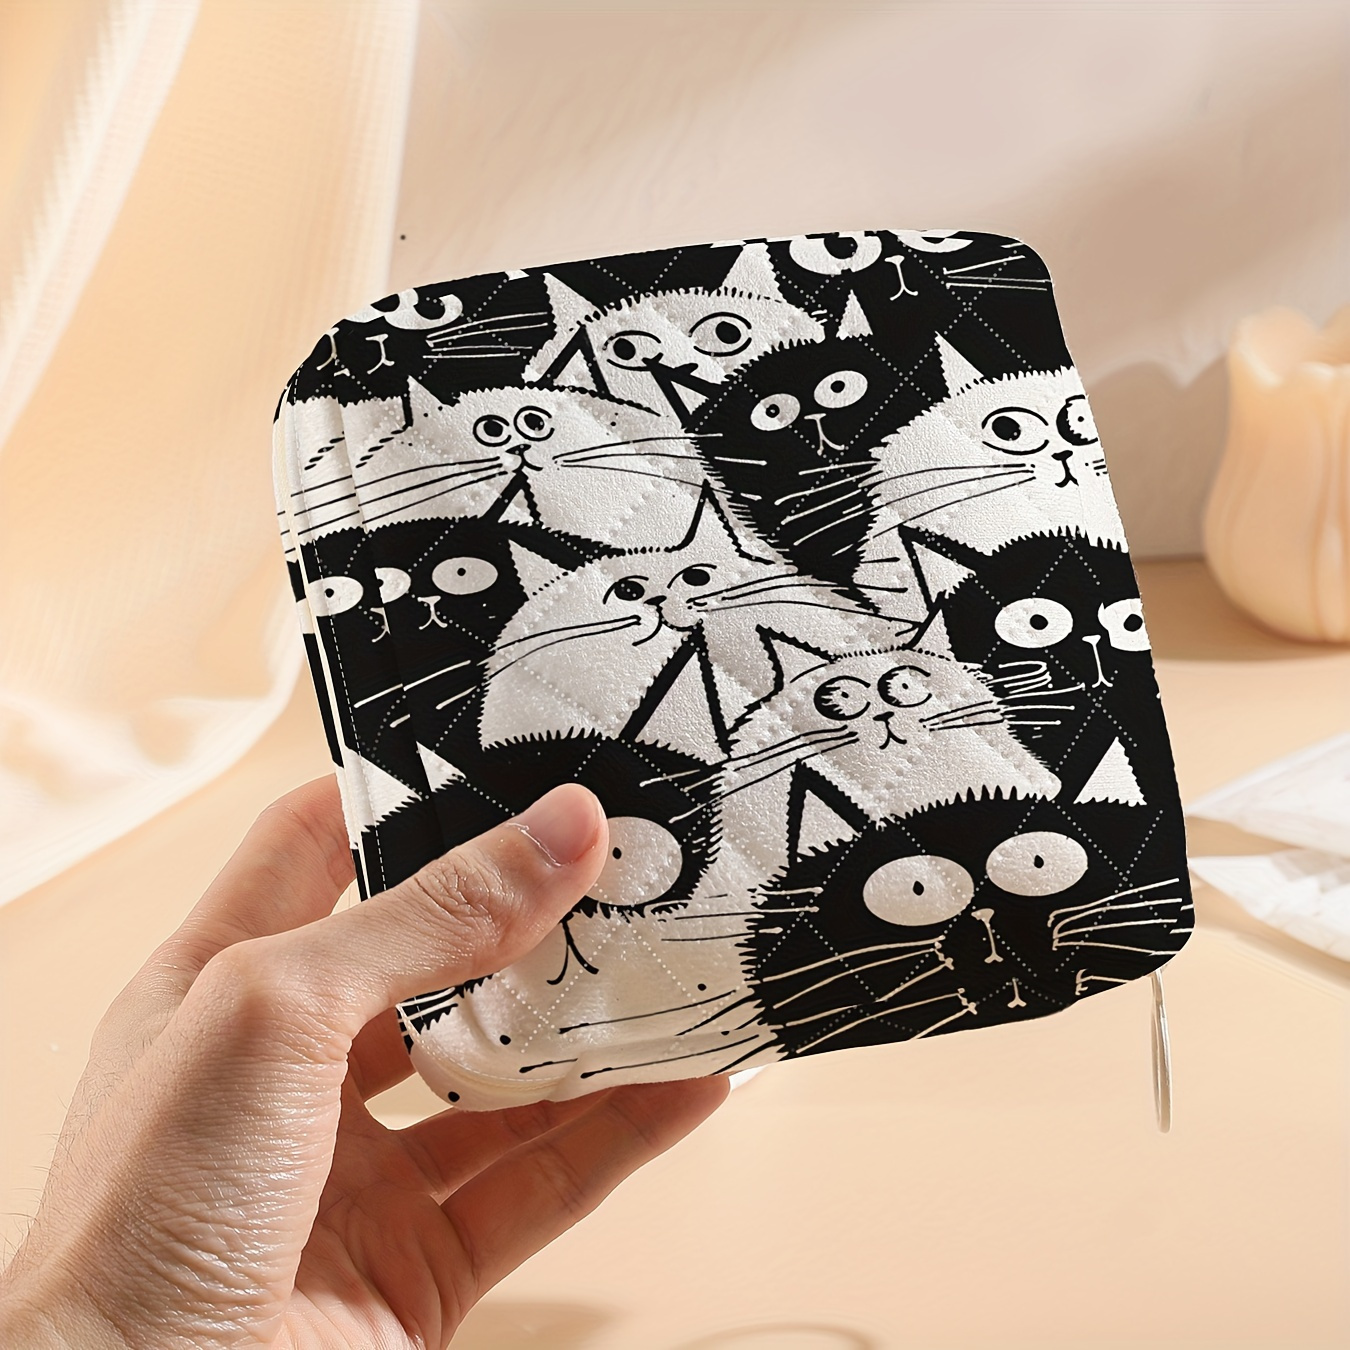 

1pc Cartoon Cat Pattern Portable Large Capacity Sanitary Napkin Organizer Pouch, Polyester Diamond Quilted Candy Miscellaneous Storage Handbag, Lightweight Multi-purpose Bag